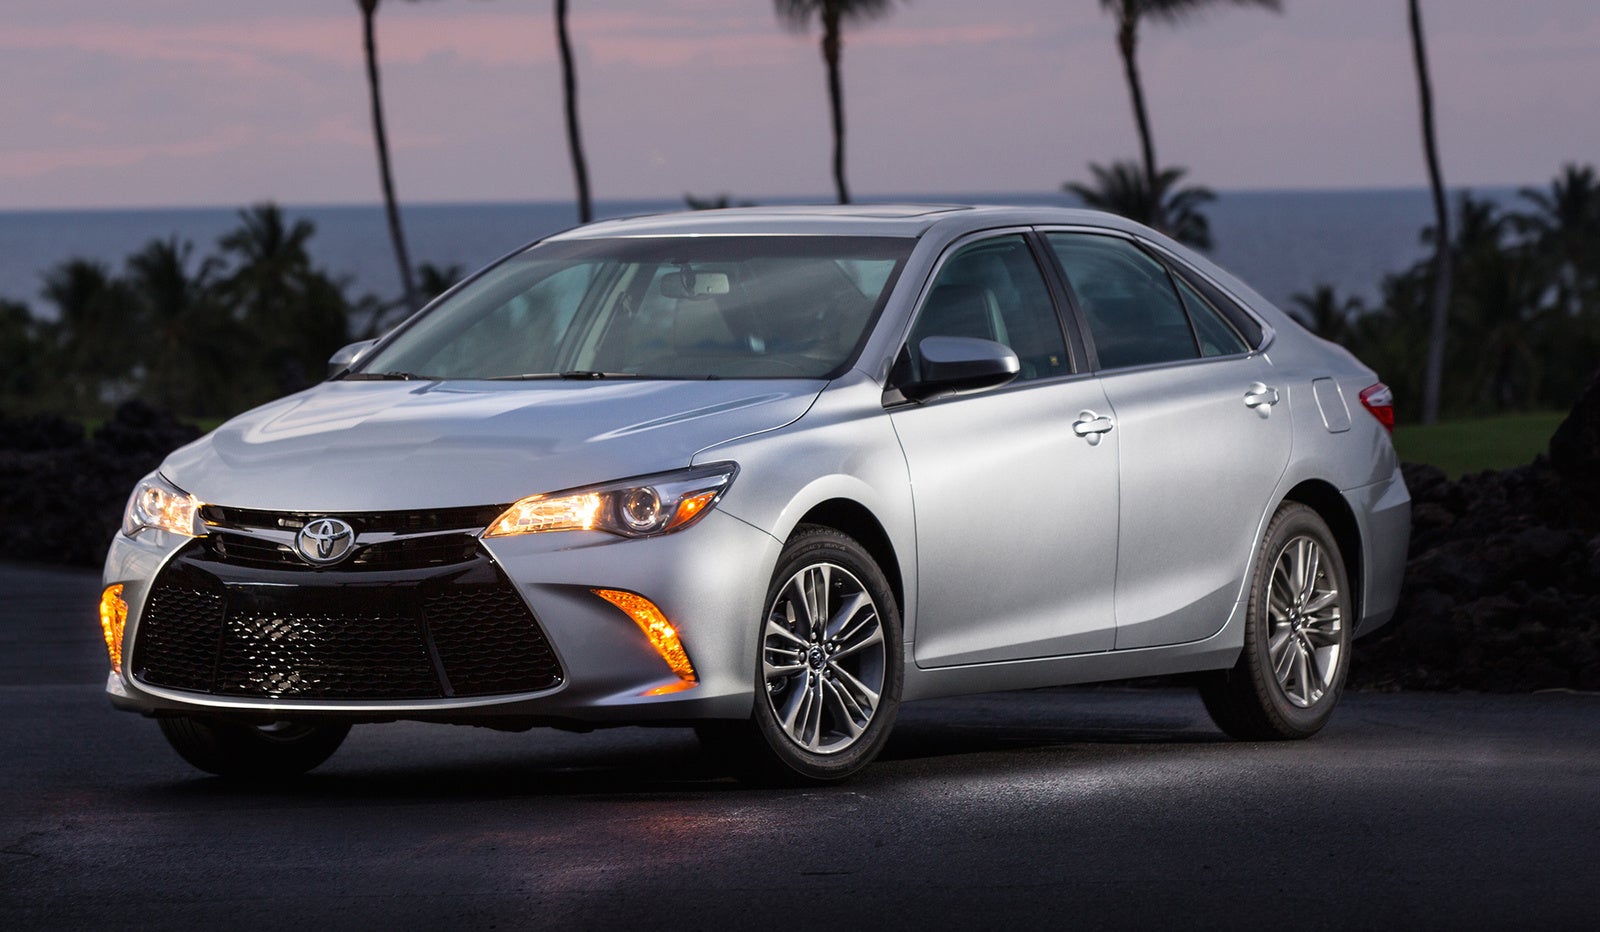 New 2015 / 2016 Toyota Camry For Sale  CarGurus